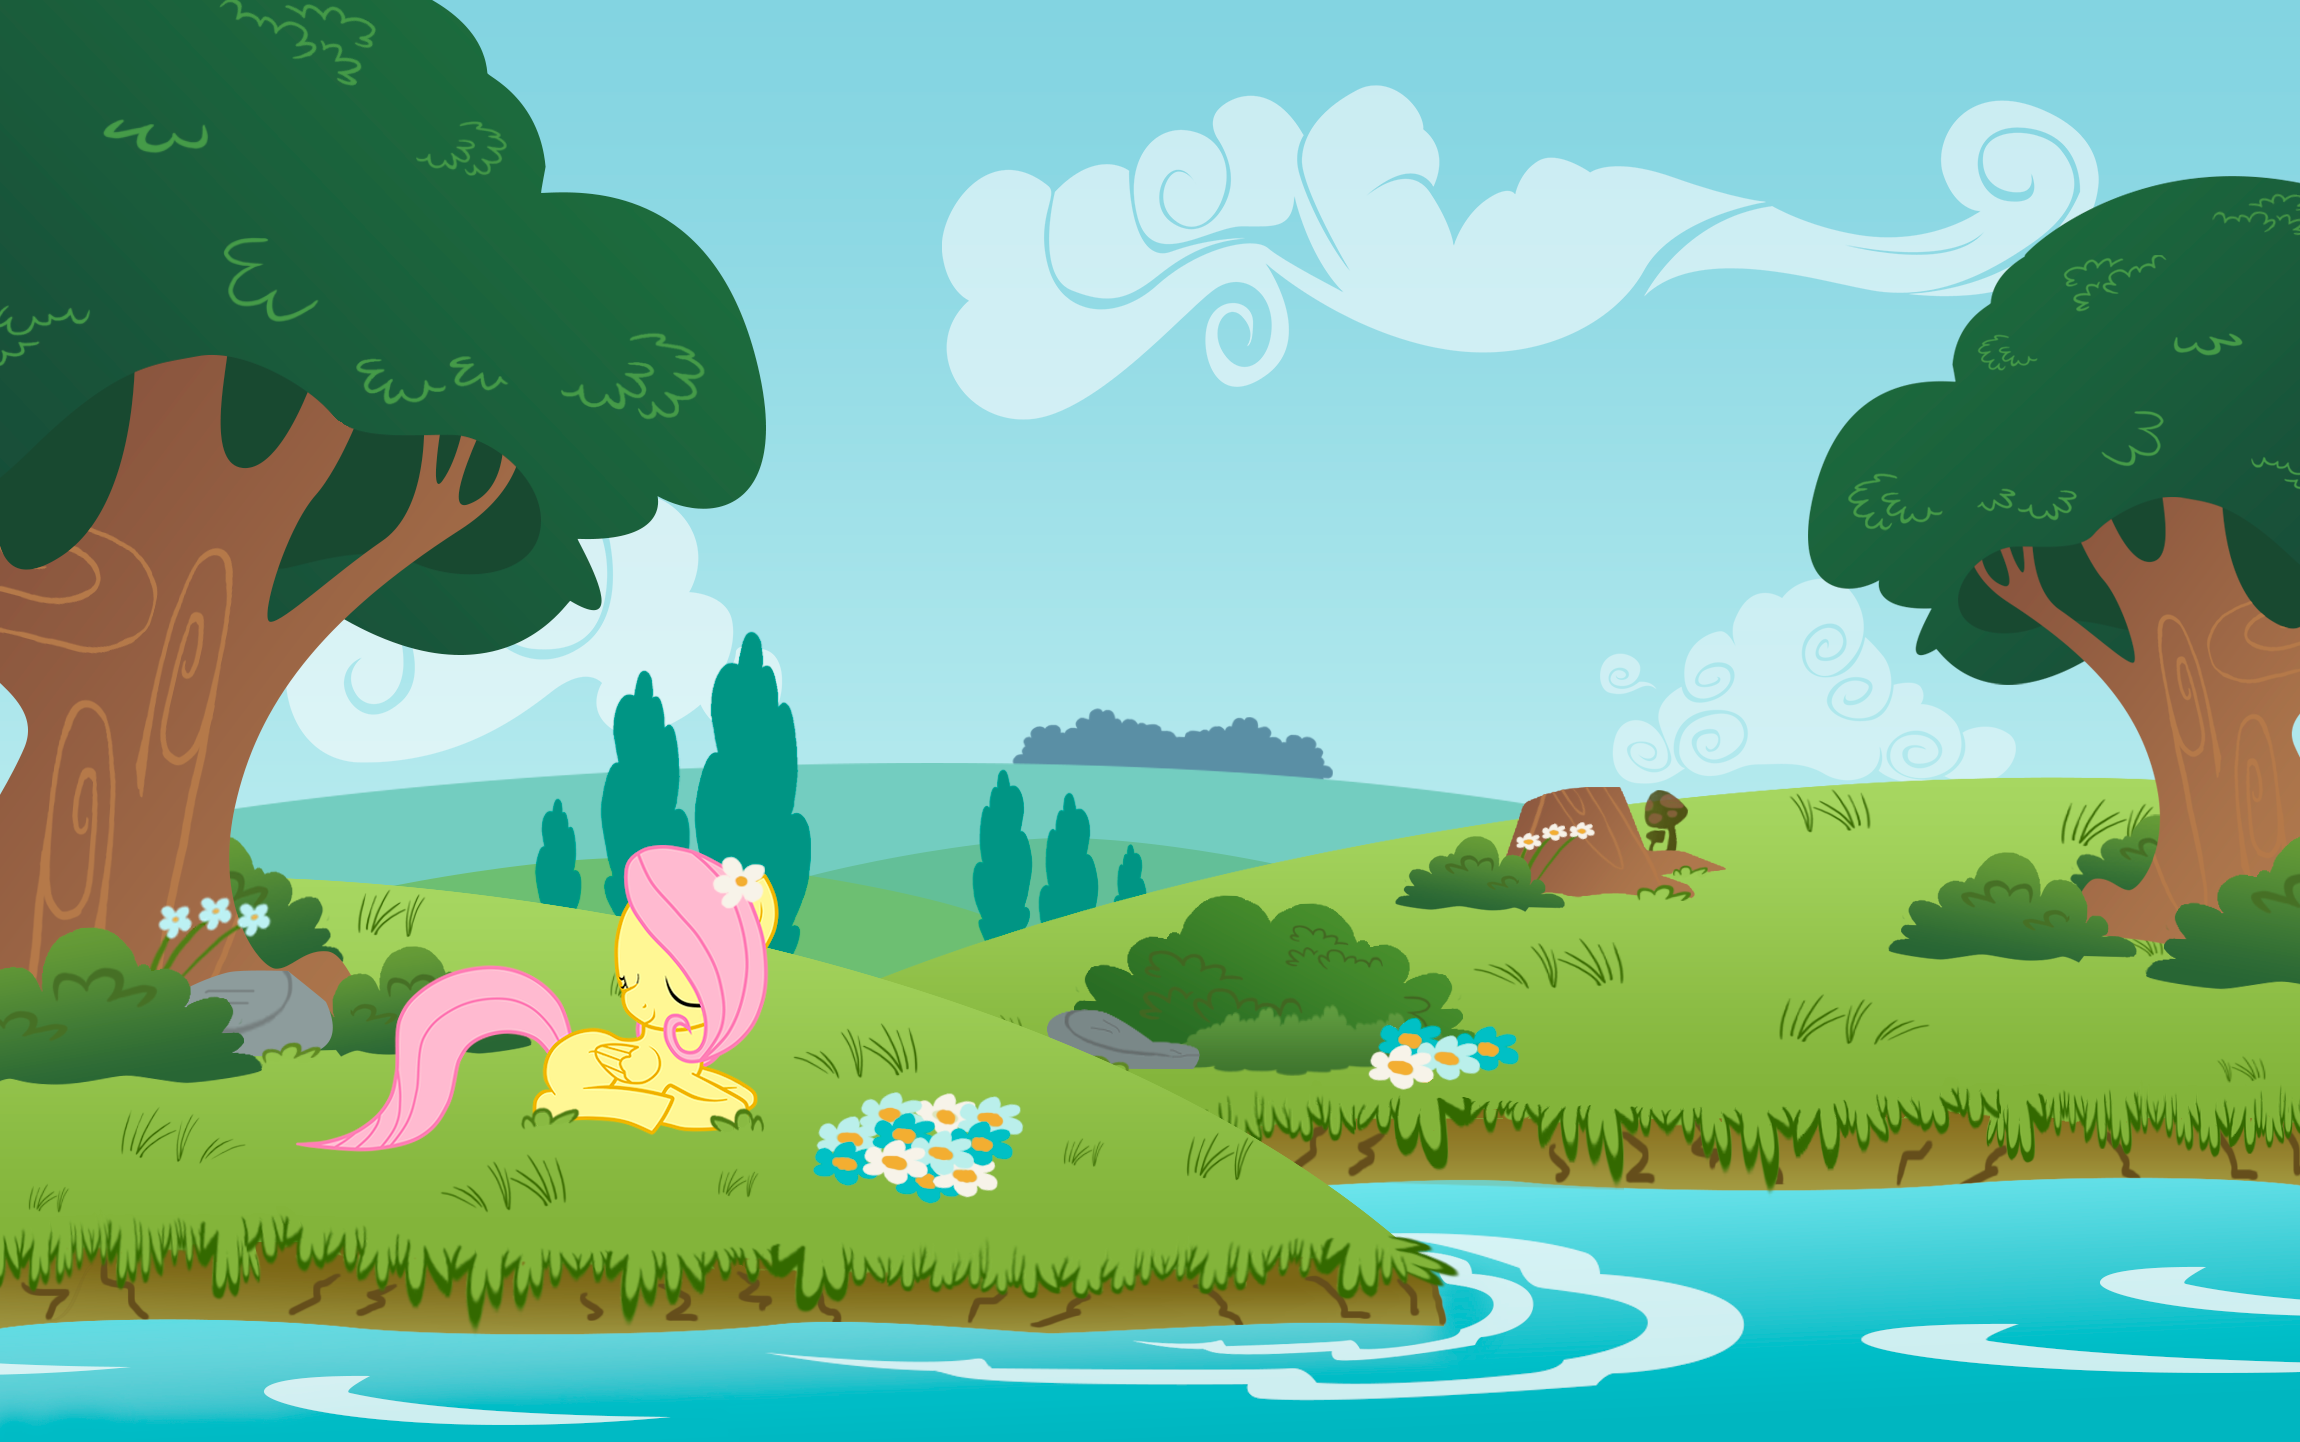 A beautiful day and Fluttershy by CosmicUnicorn, JunkiesNewb and KennyKlent